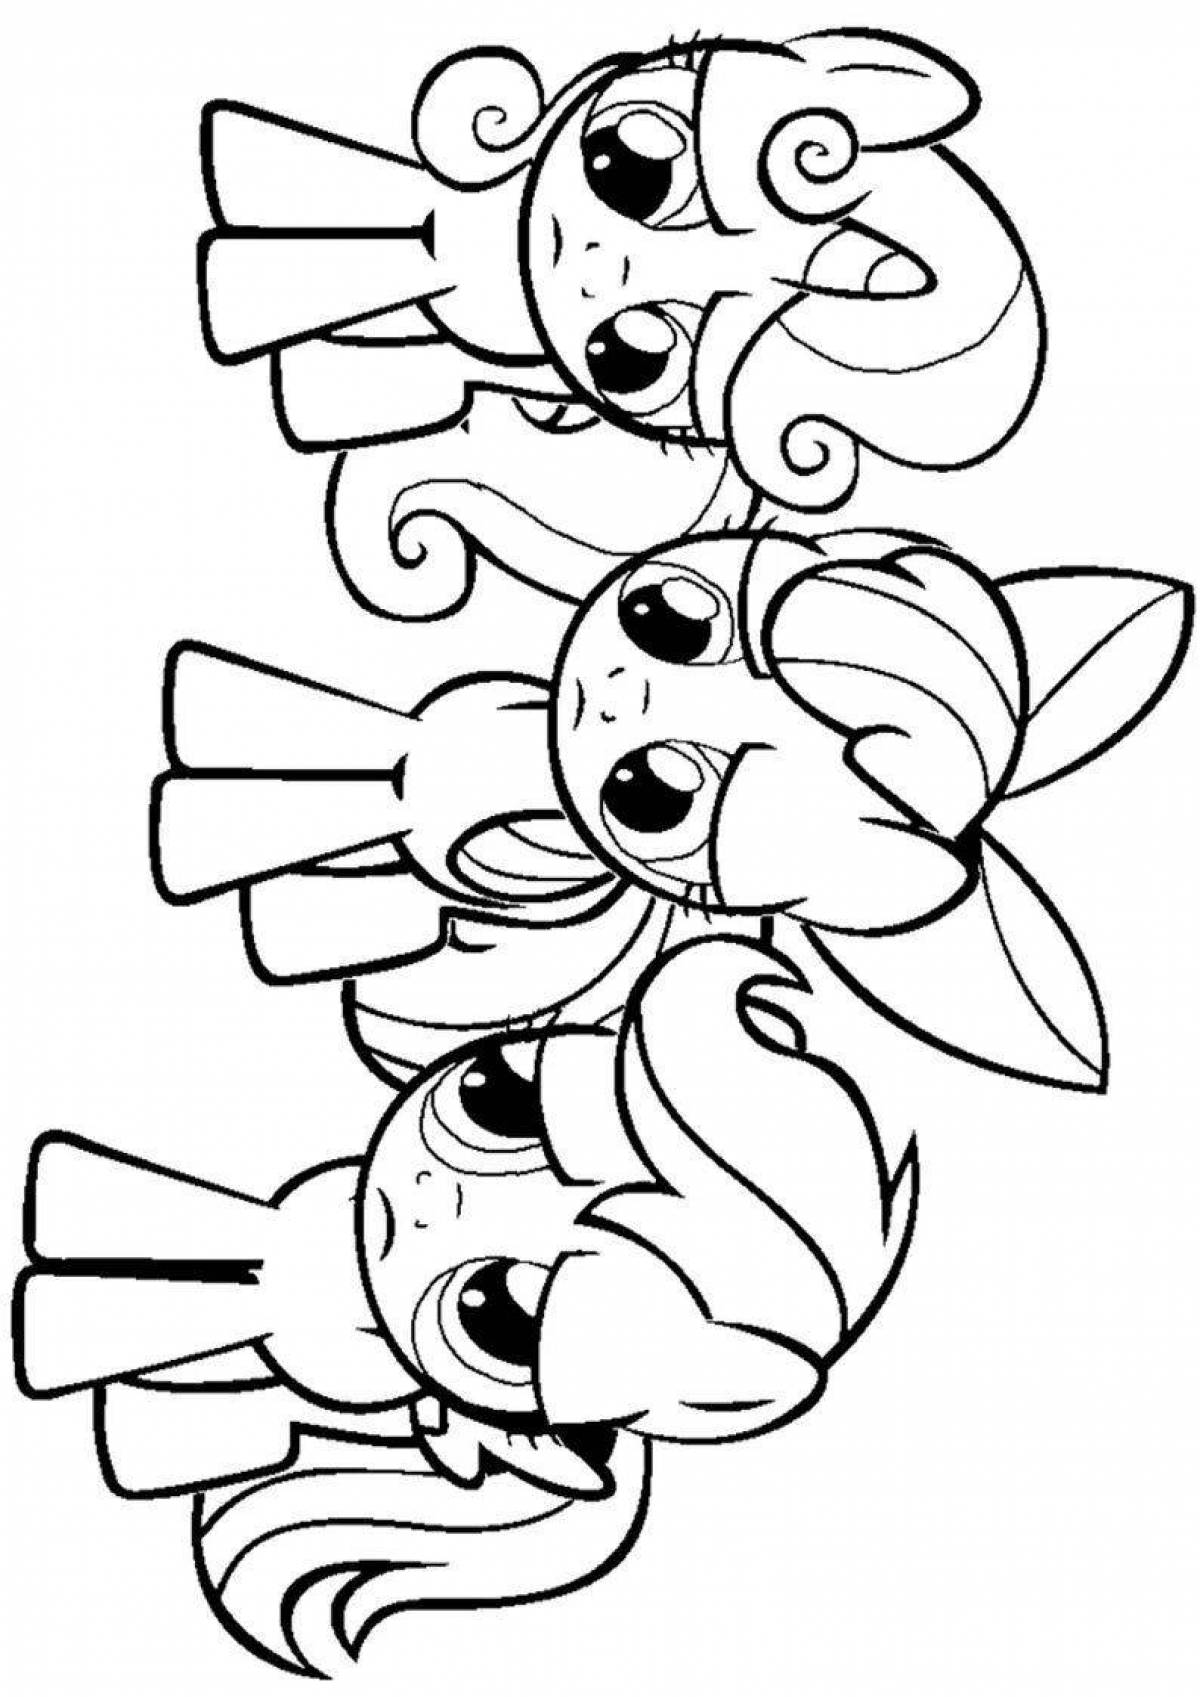 Apple bloom adorable coloring book